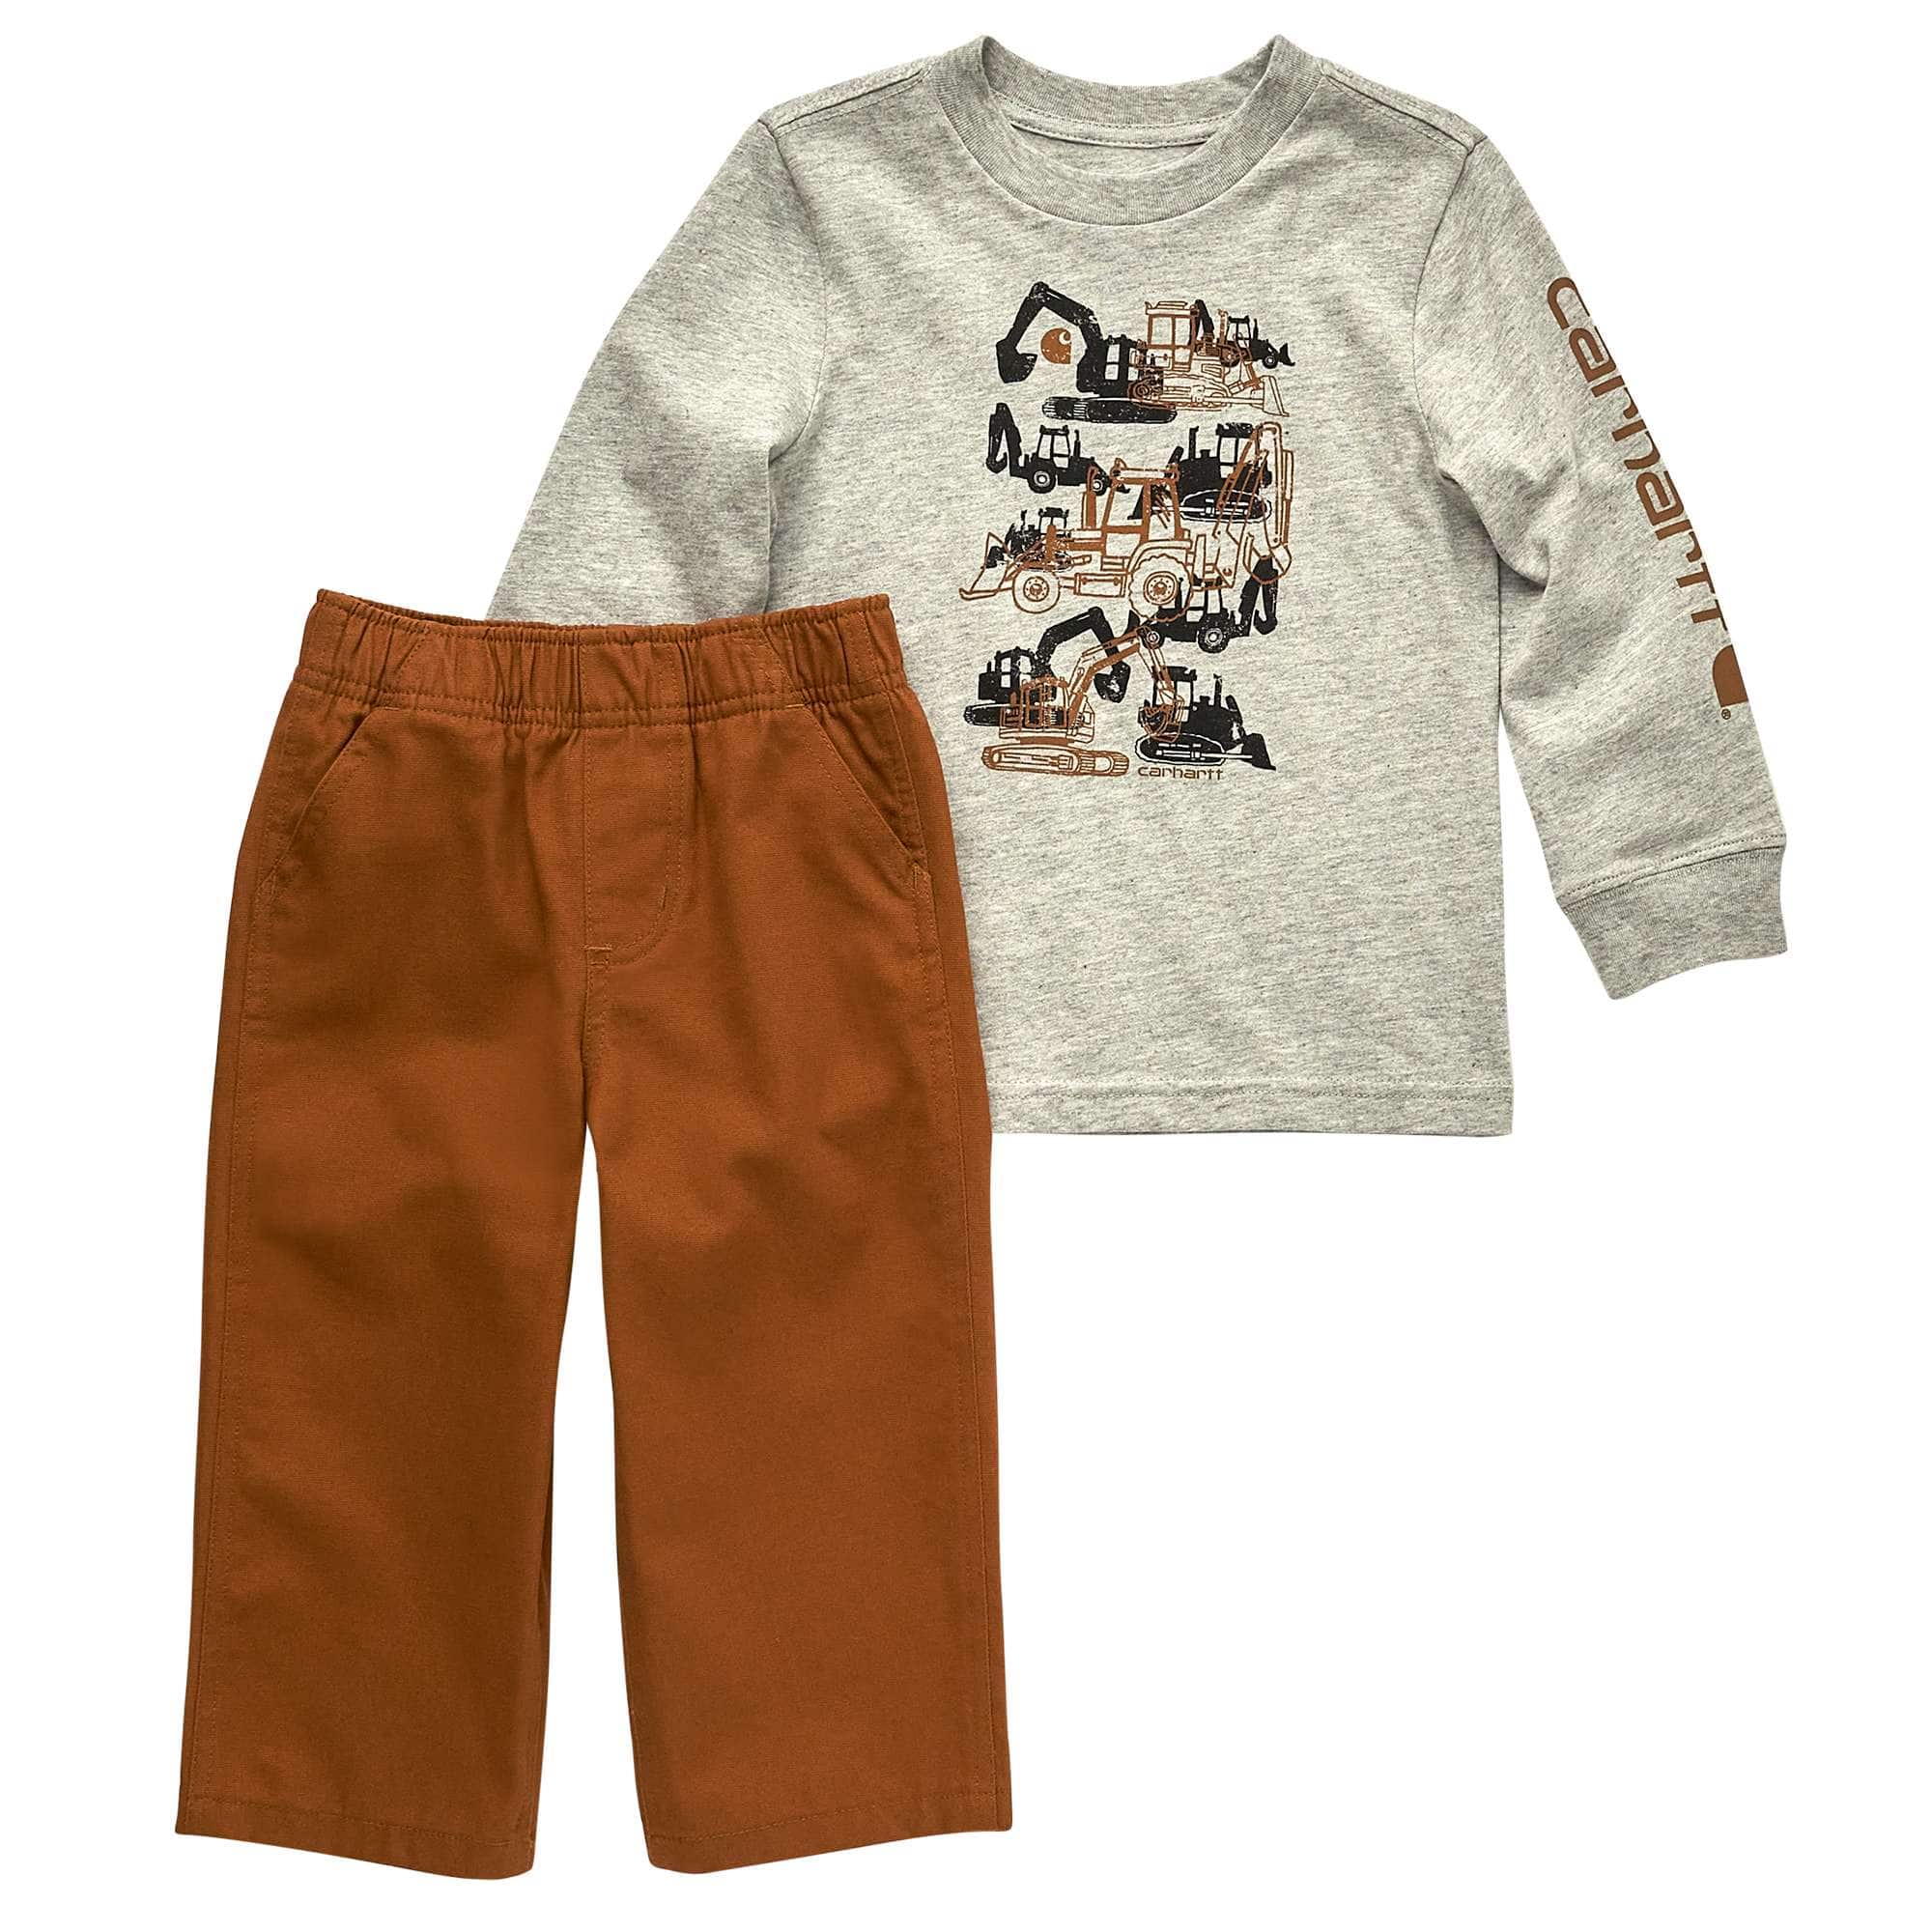 Carhartt Button-Down Fishing Shirt, Catch and Release T-Shirt, and Canvas  Shorts 3-Piece Set for Babies